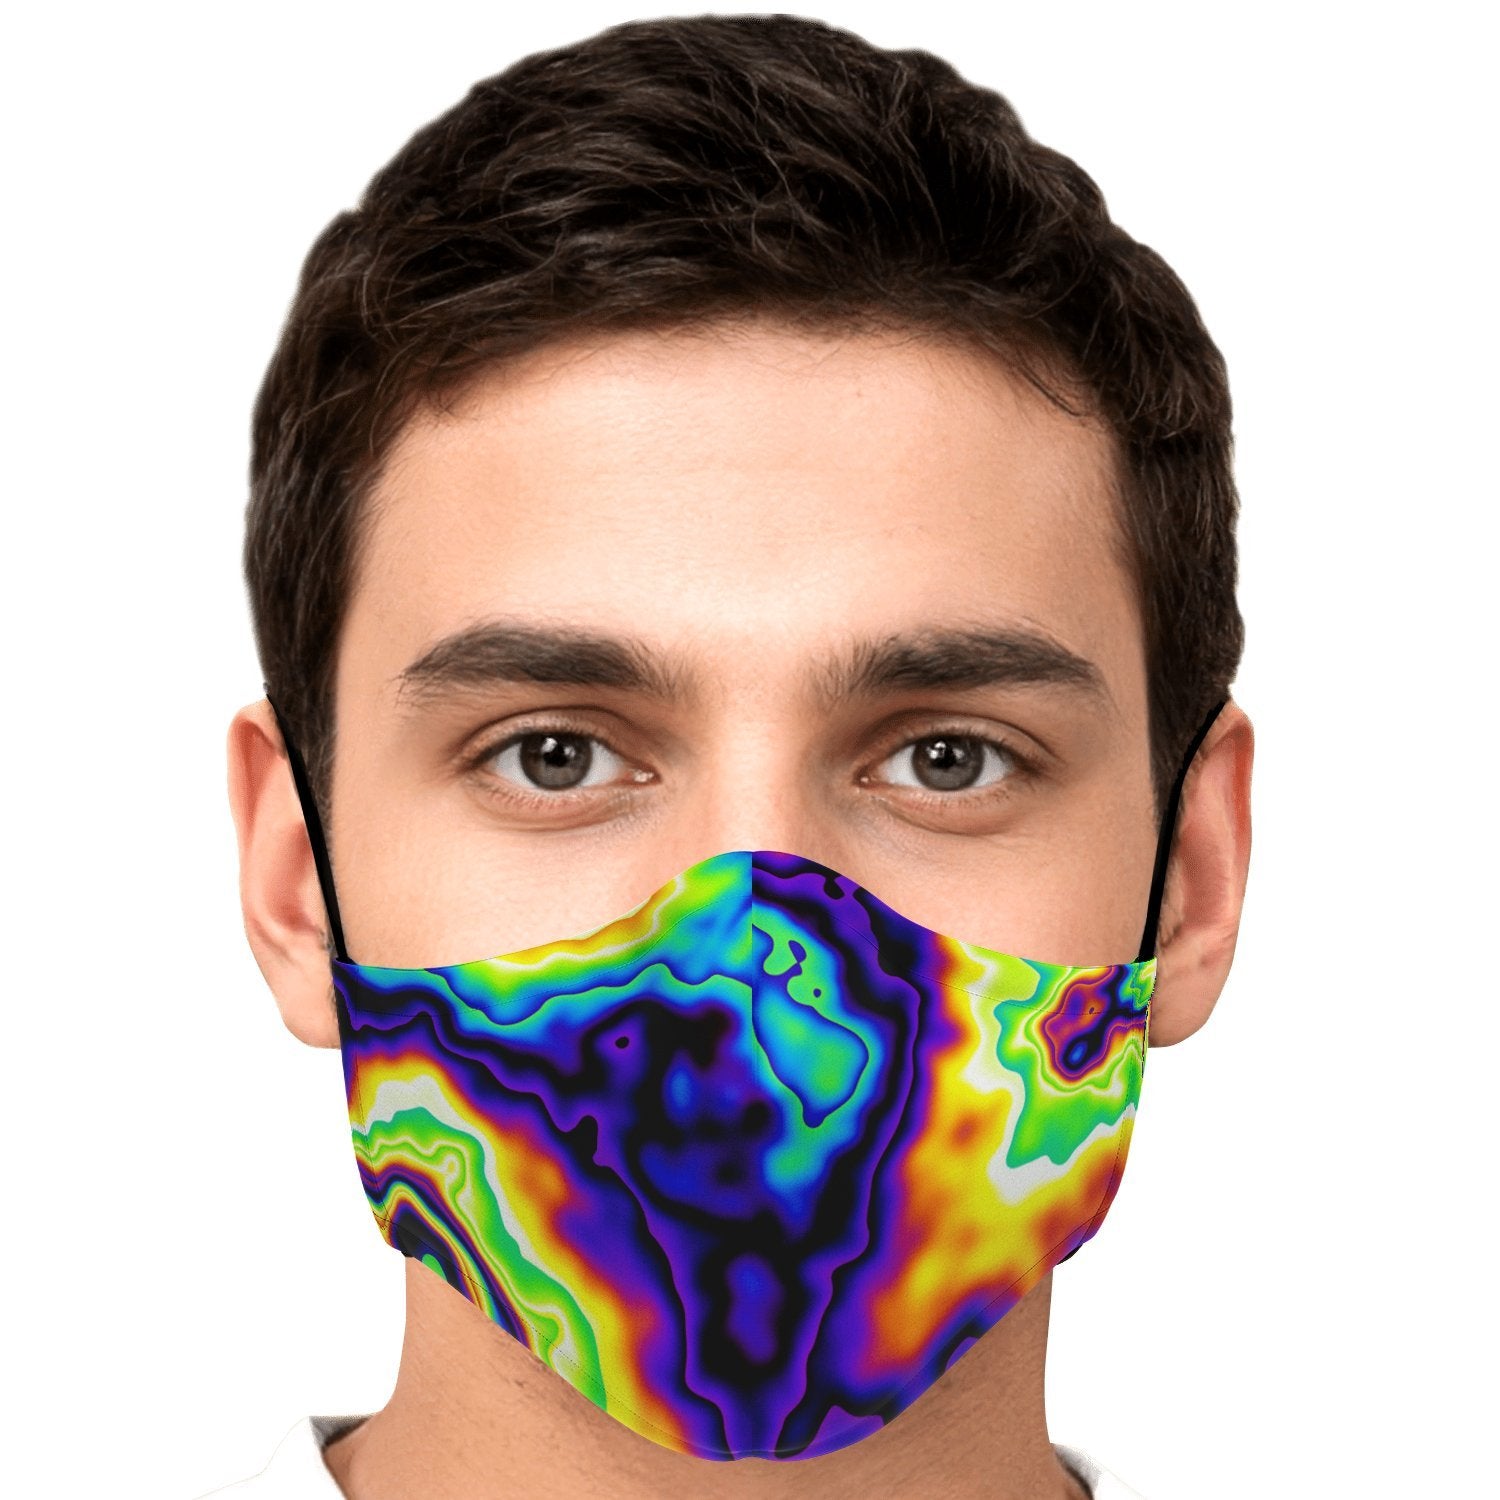 Abstract Colorful Clouds Adjustable Youth Adult Fit All Face Mask With Filter - kayzers